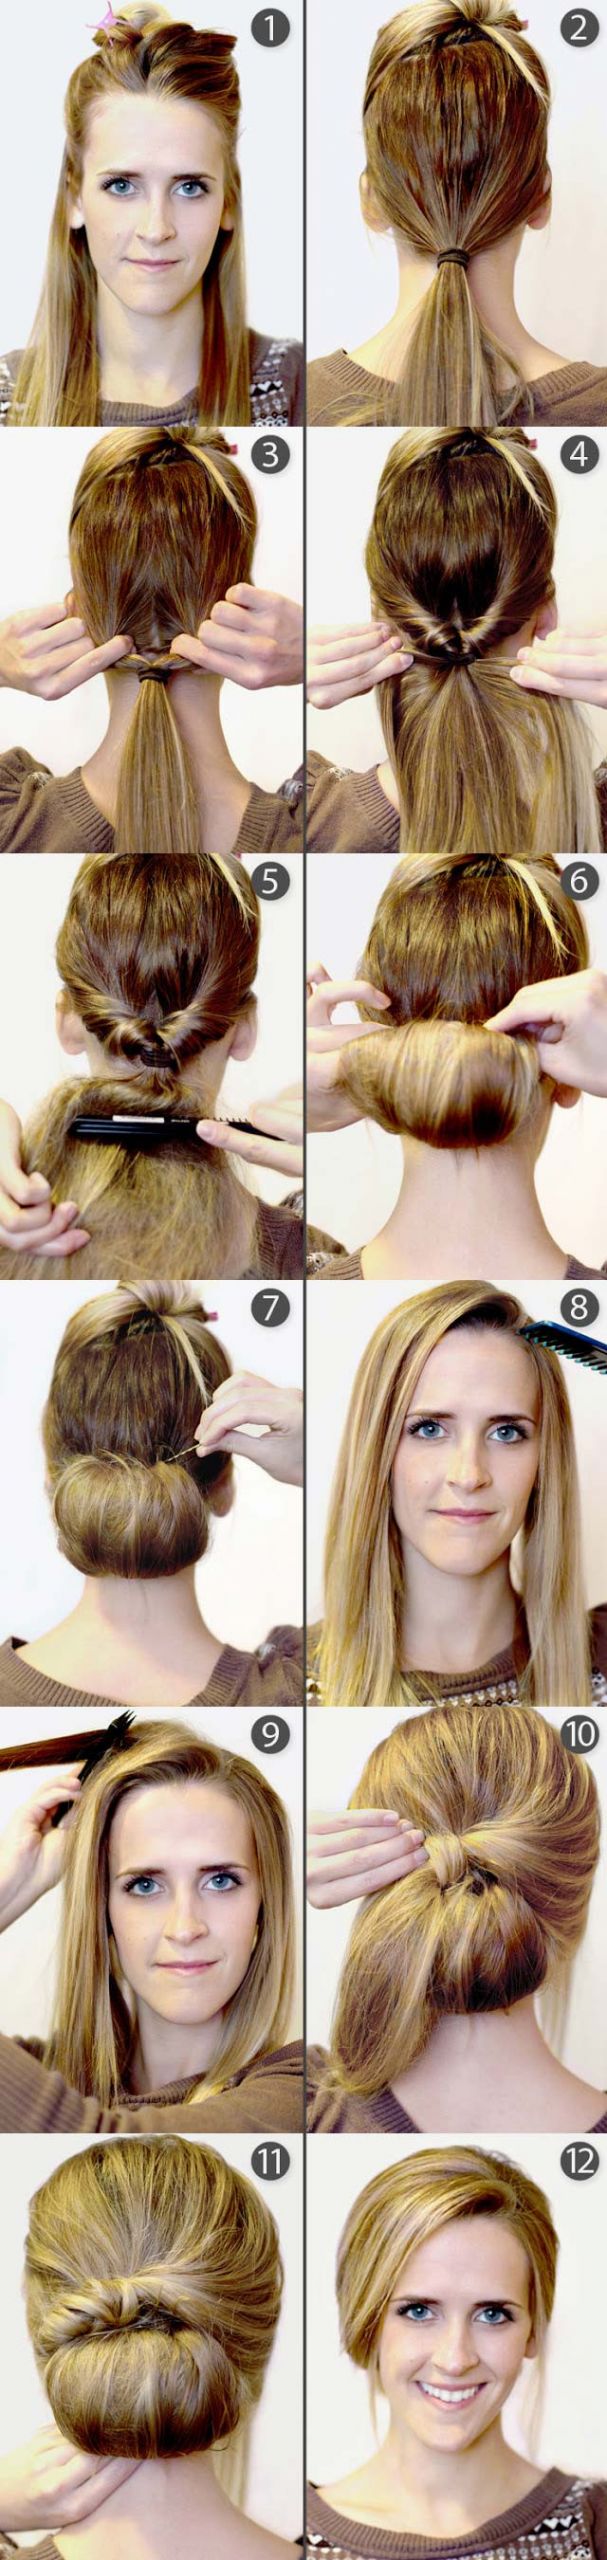 Diy Hairstyles For Long Hair
 DIY Your Step by Step for the Best Cute Hairstyles